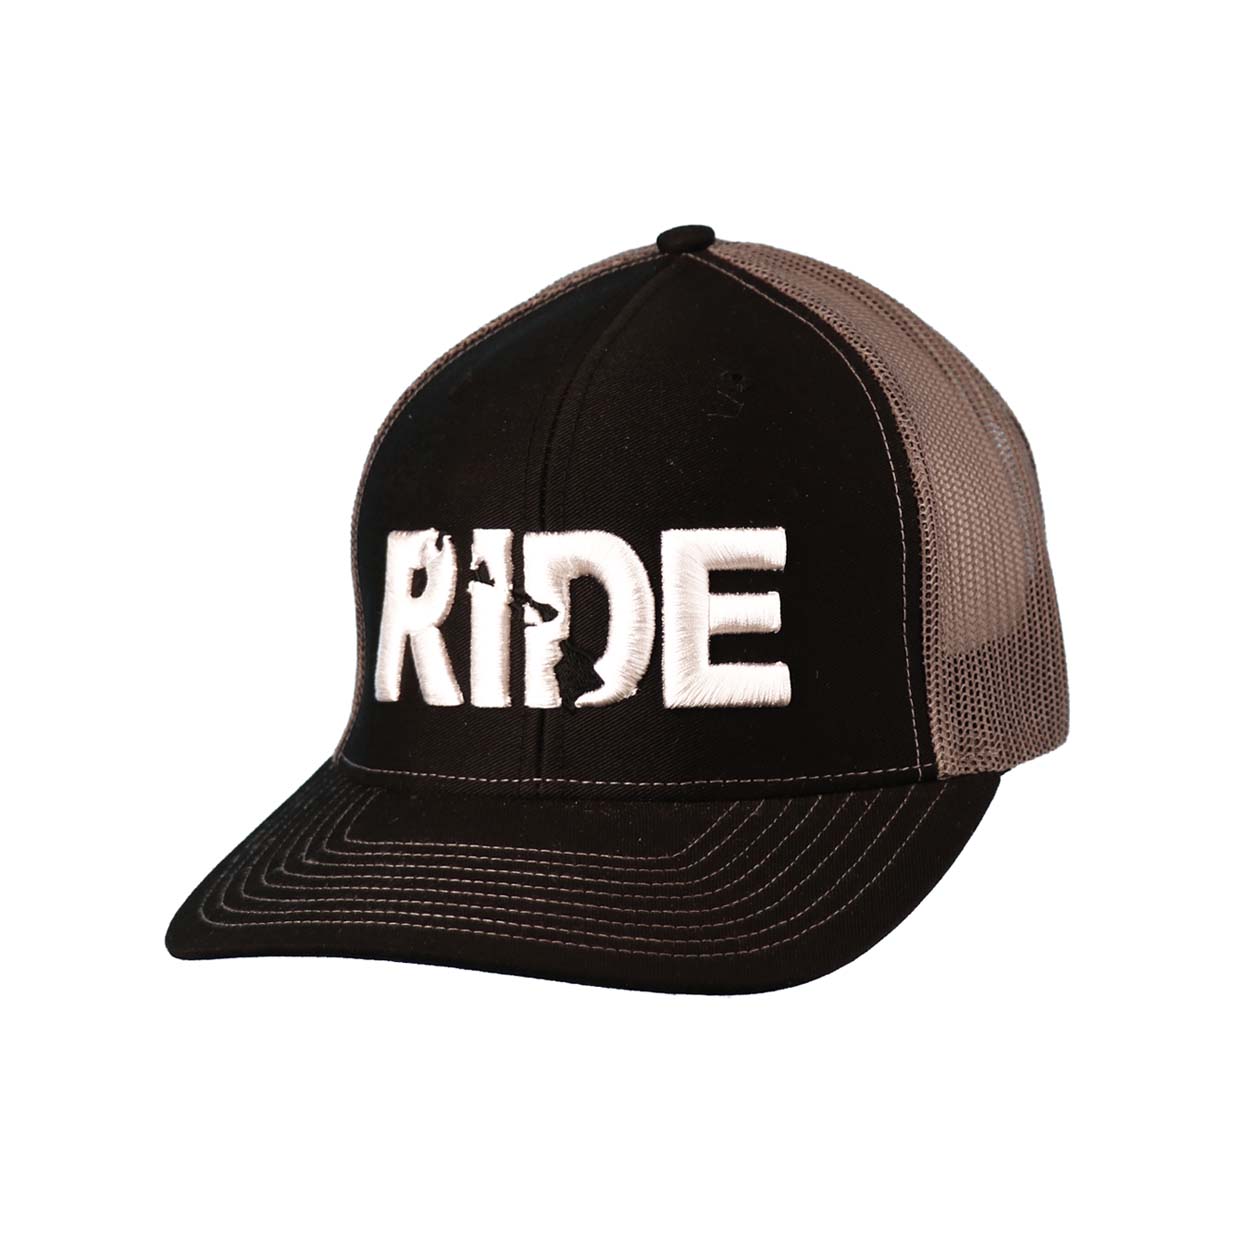 Ride Hawaii Classic Embroidered Snapback Trucker Hat Black/Gray